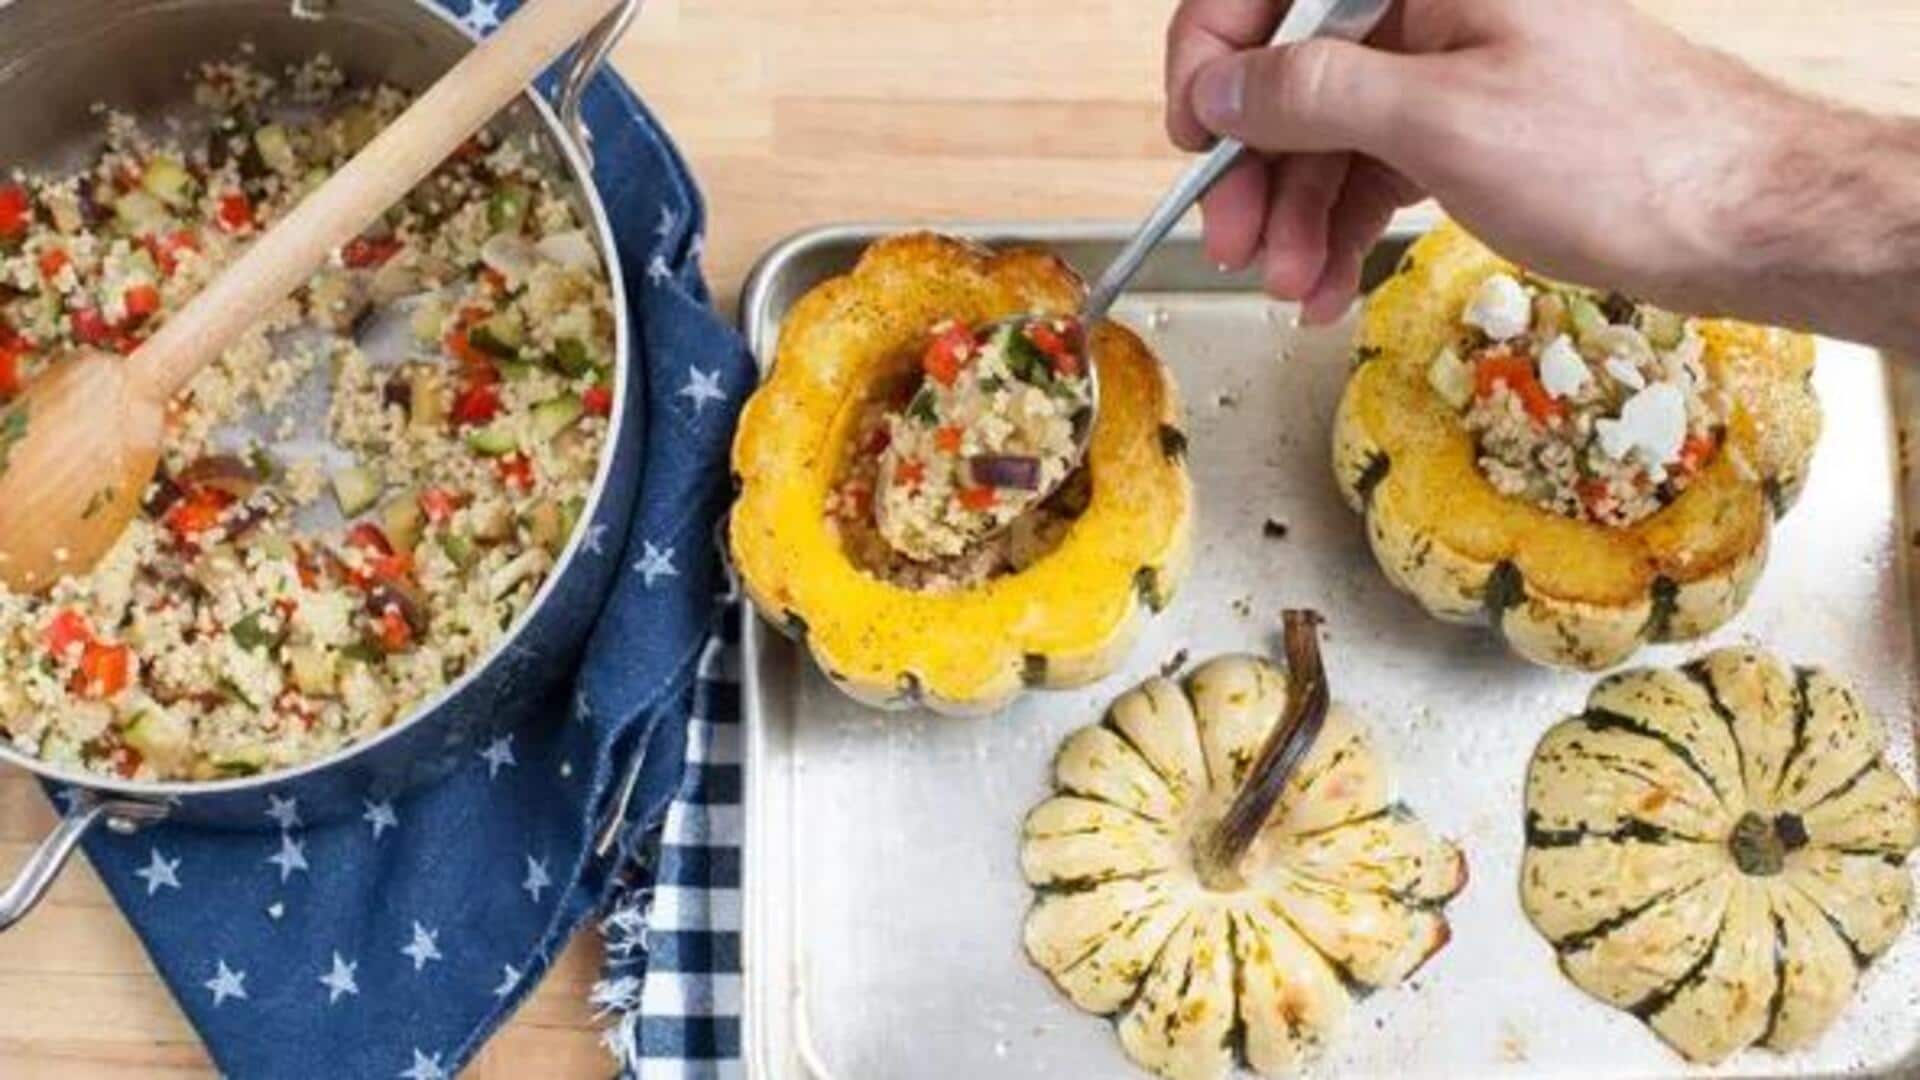 It's recipe time! Try this risotto-stuffed sweet dumpling squash